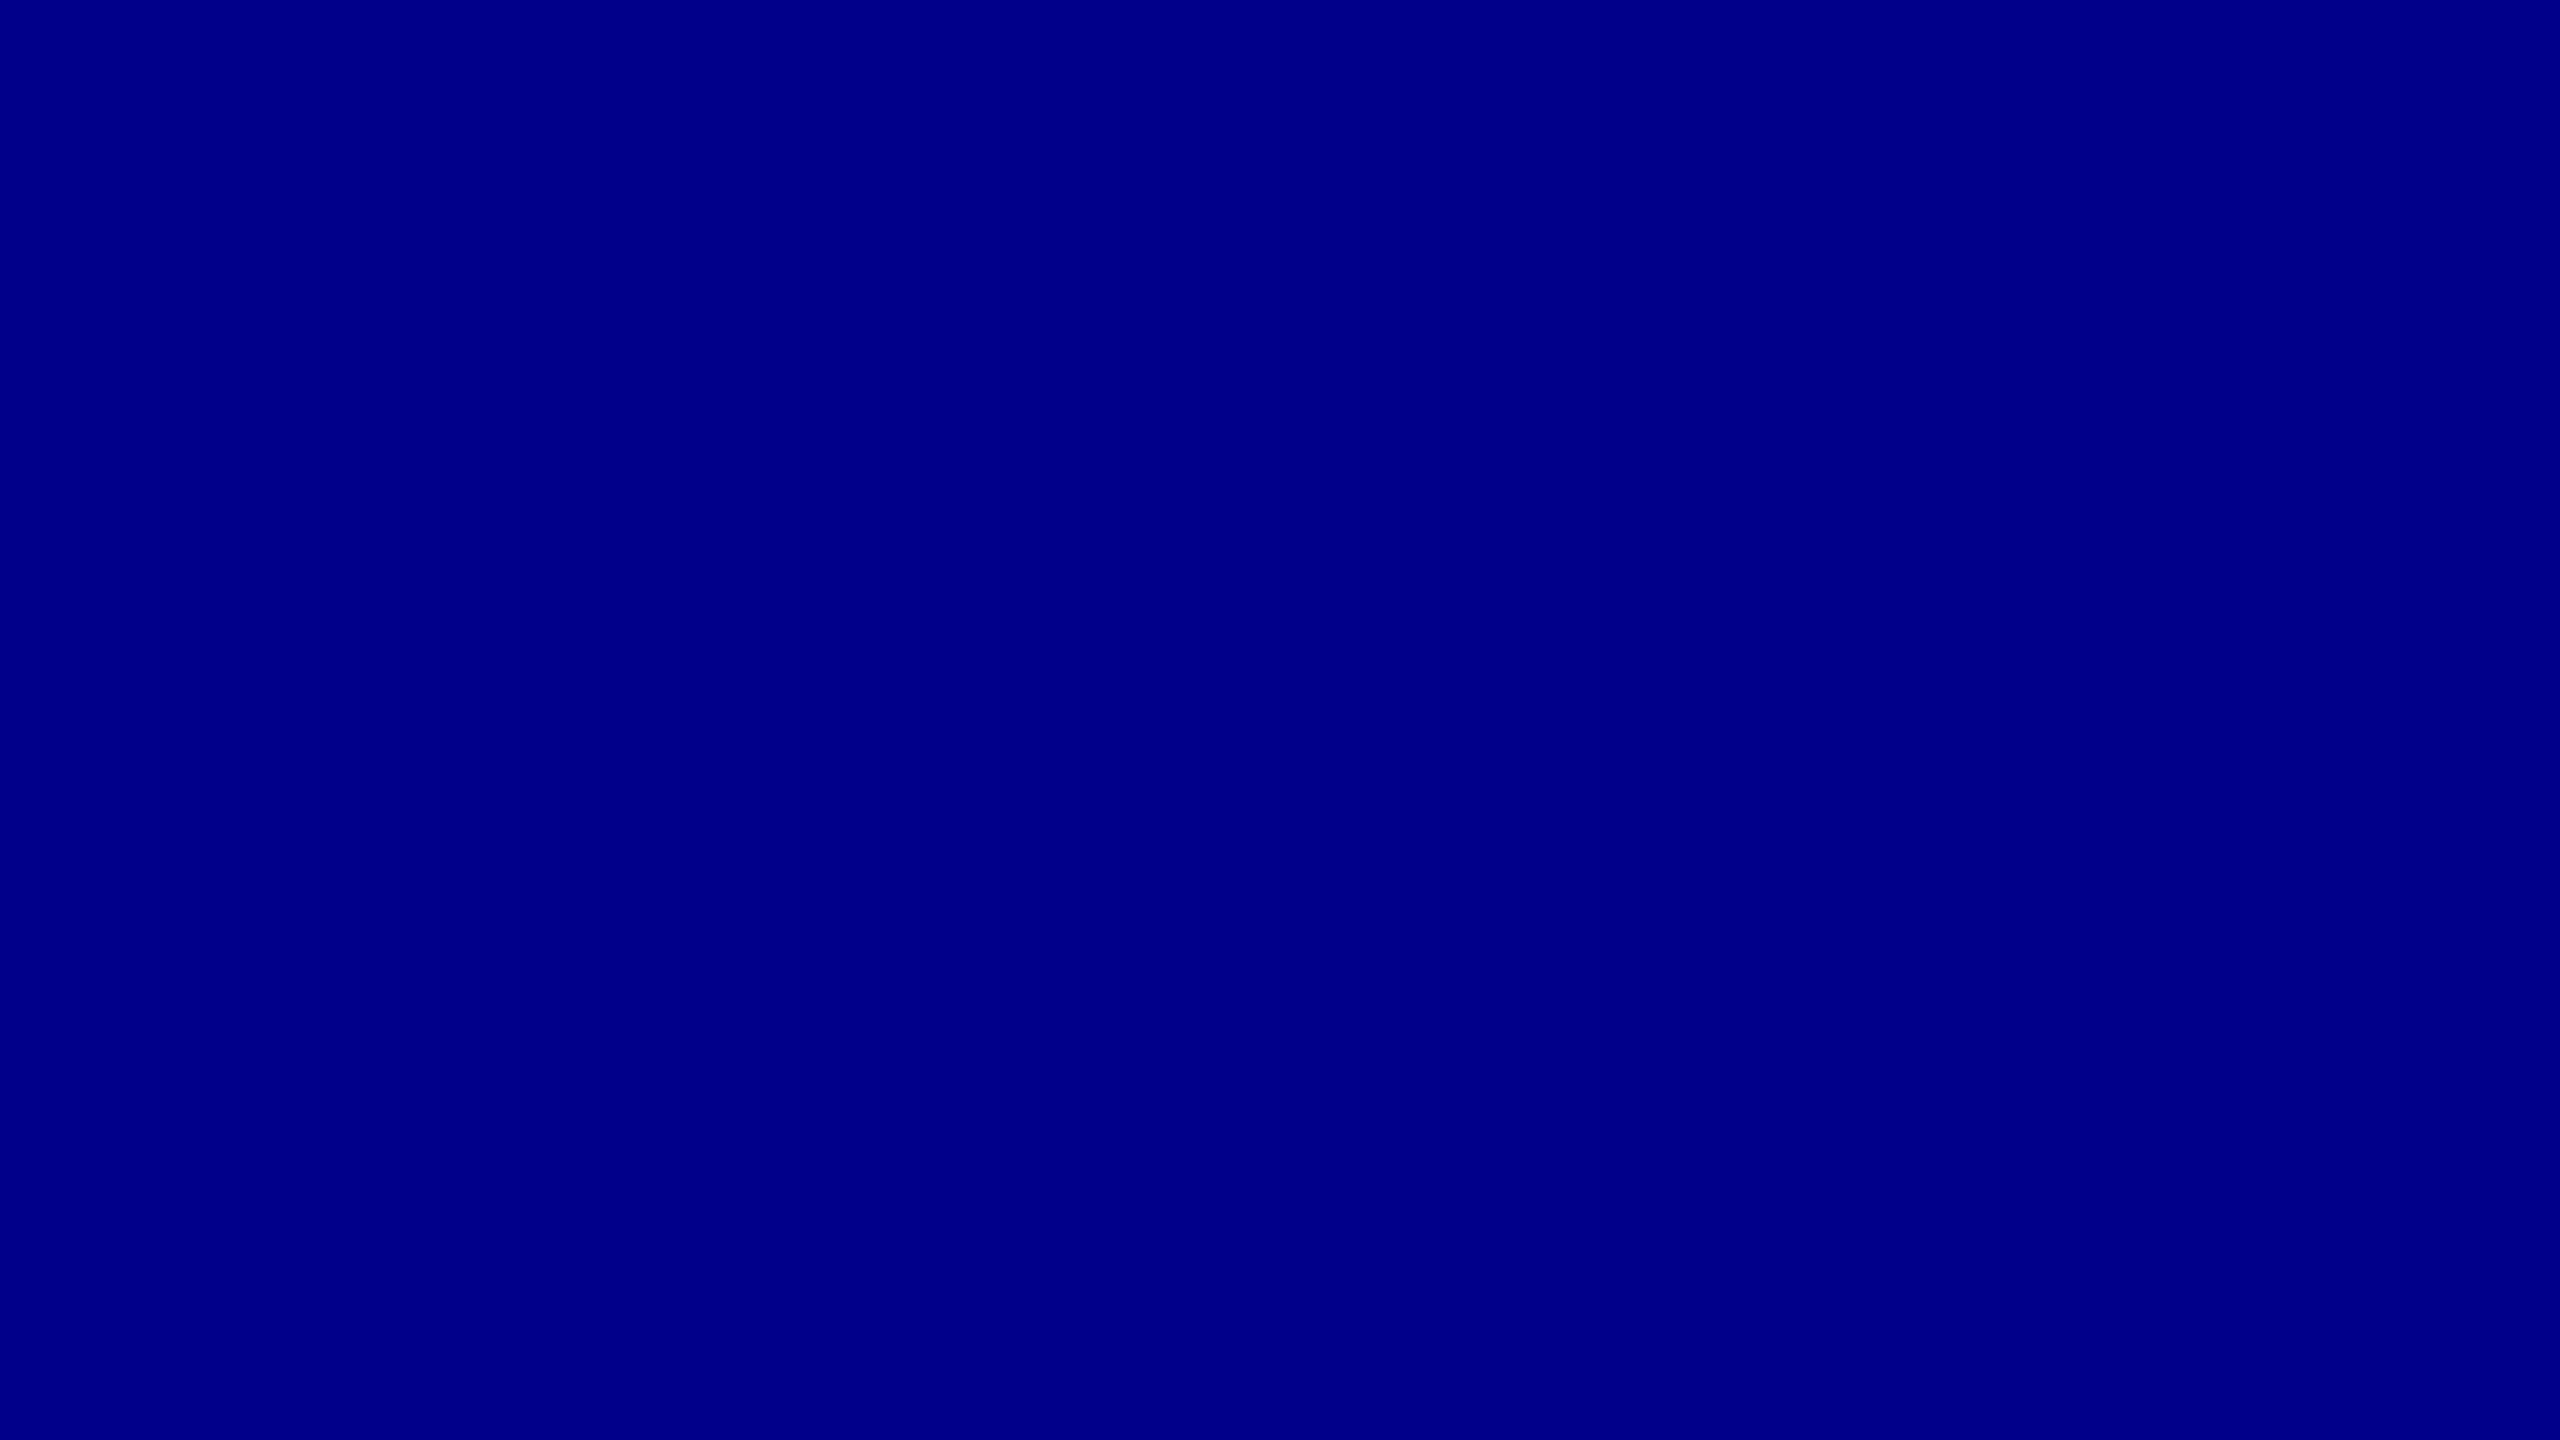 Dark Solid Blue Background Hd Wallpapers Pictures 2560x1440